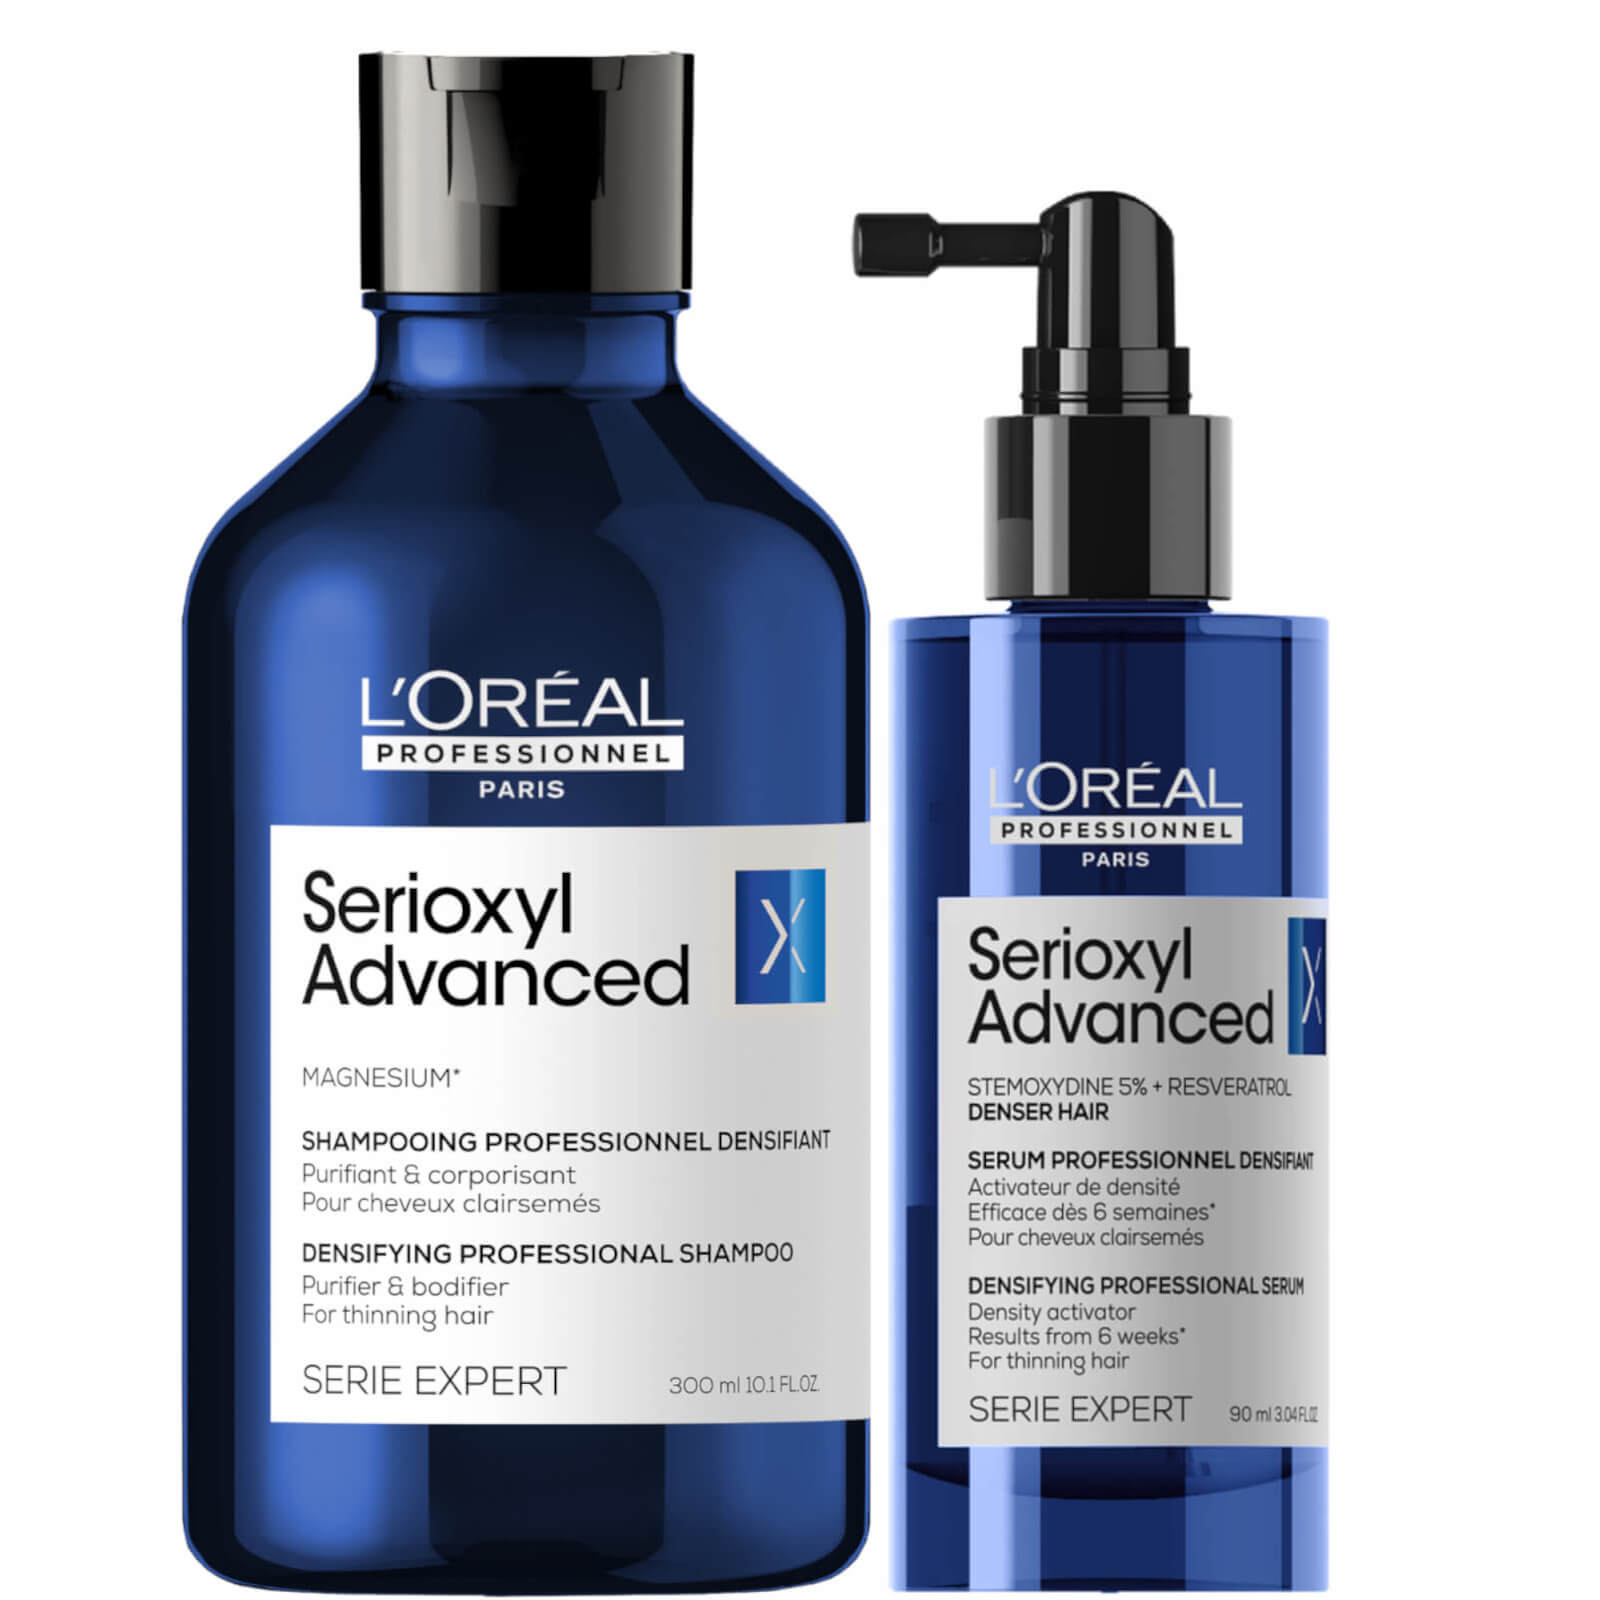 L'Oreal Professionnel Serie Expert Scalp Advanced Shampoo and Hair Thinning Serum Duo